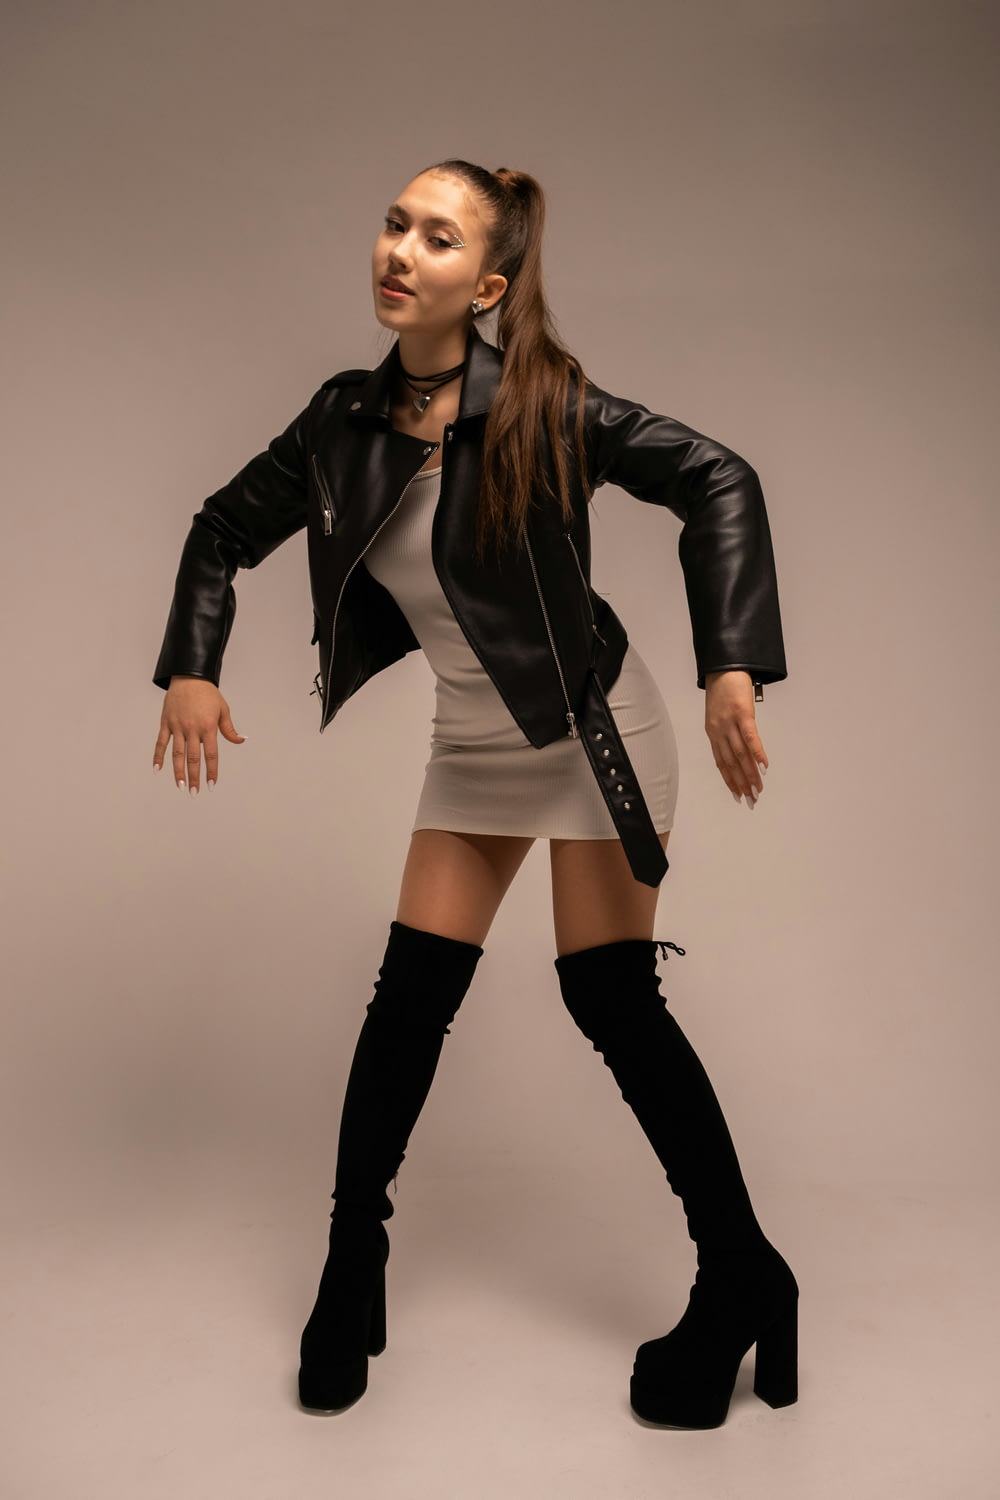 a woman in a short skirt and black jacket